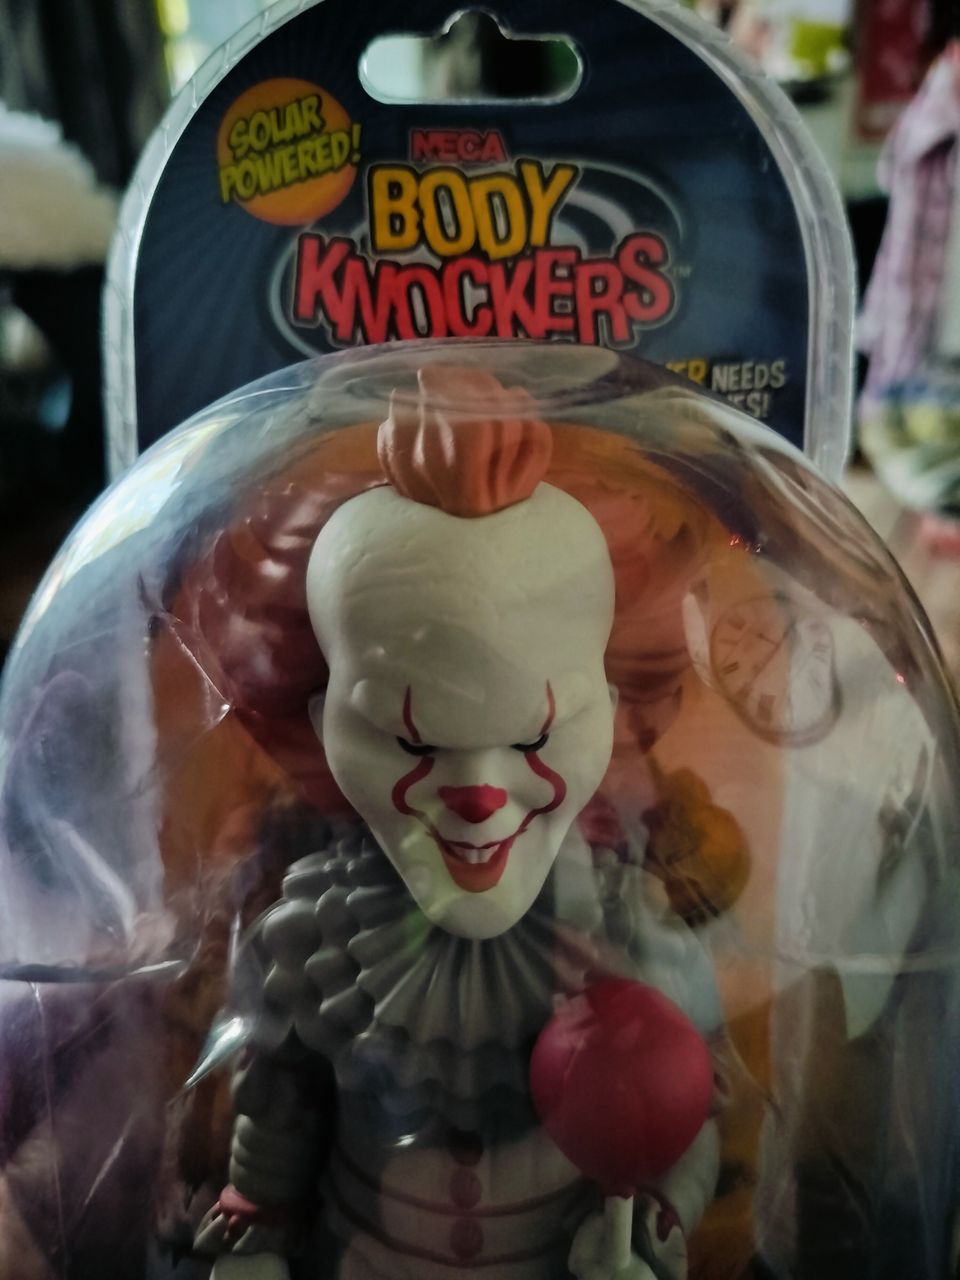 Neca Body Knockers / Pennywise